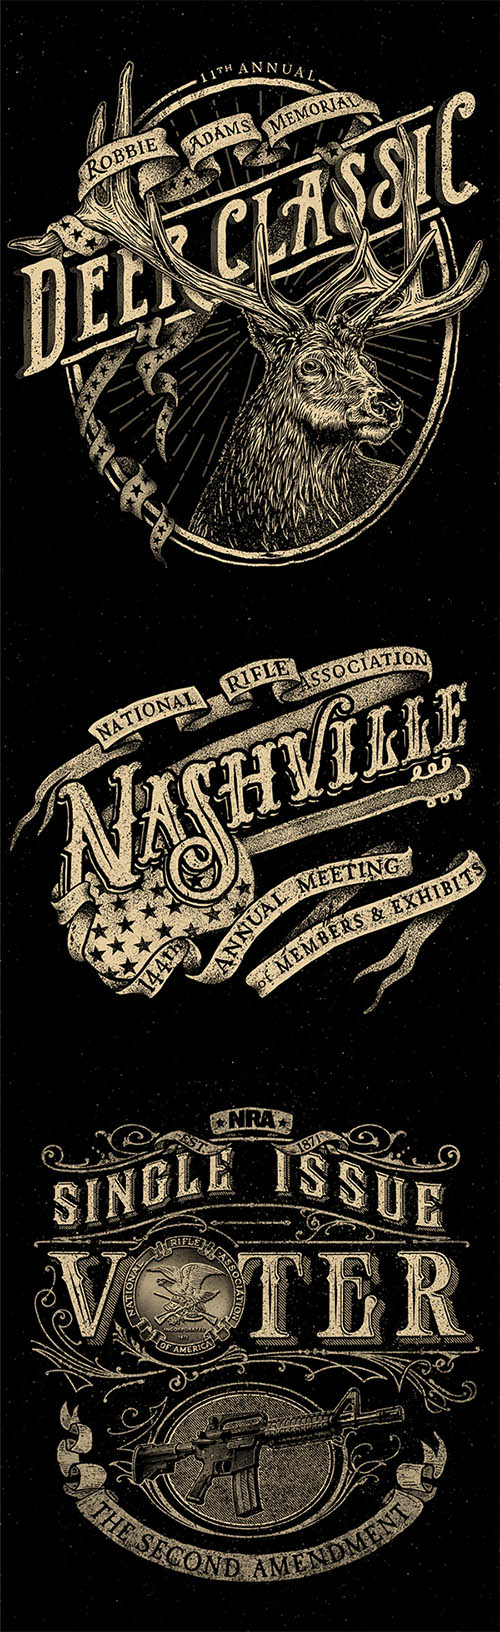 Typography Served'Hand Drawn Typography 2014 By Jeff Trish